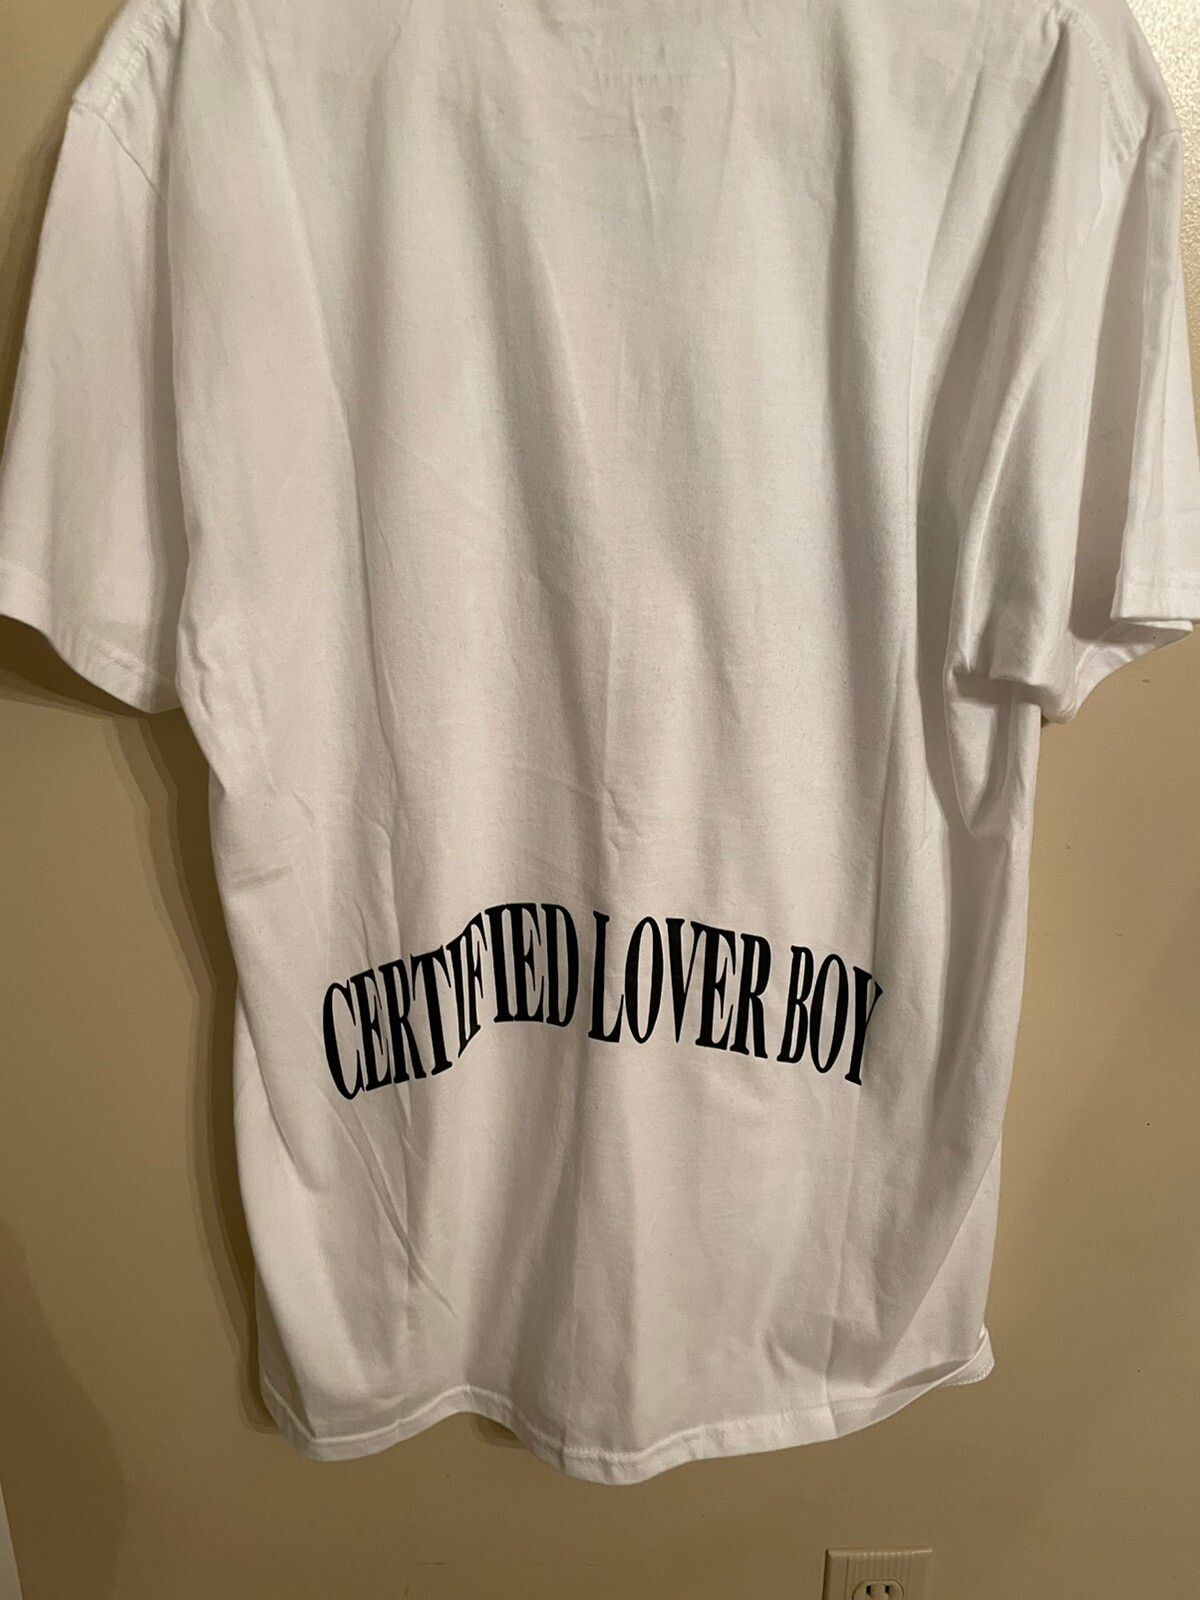 Nike Drake CLB Cupid Tee Size US L / EU 52-54 / 3 - 4 Preview